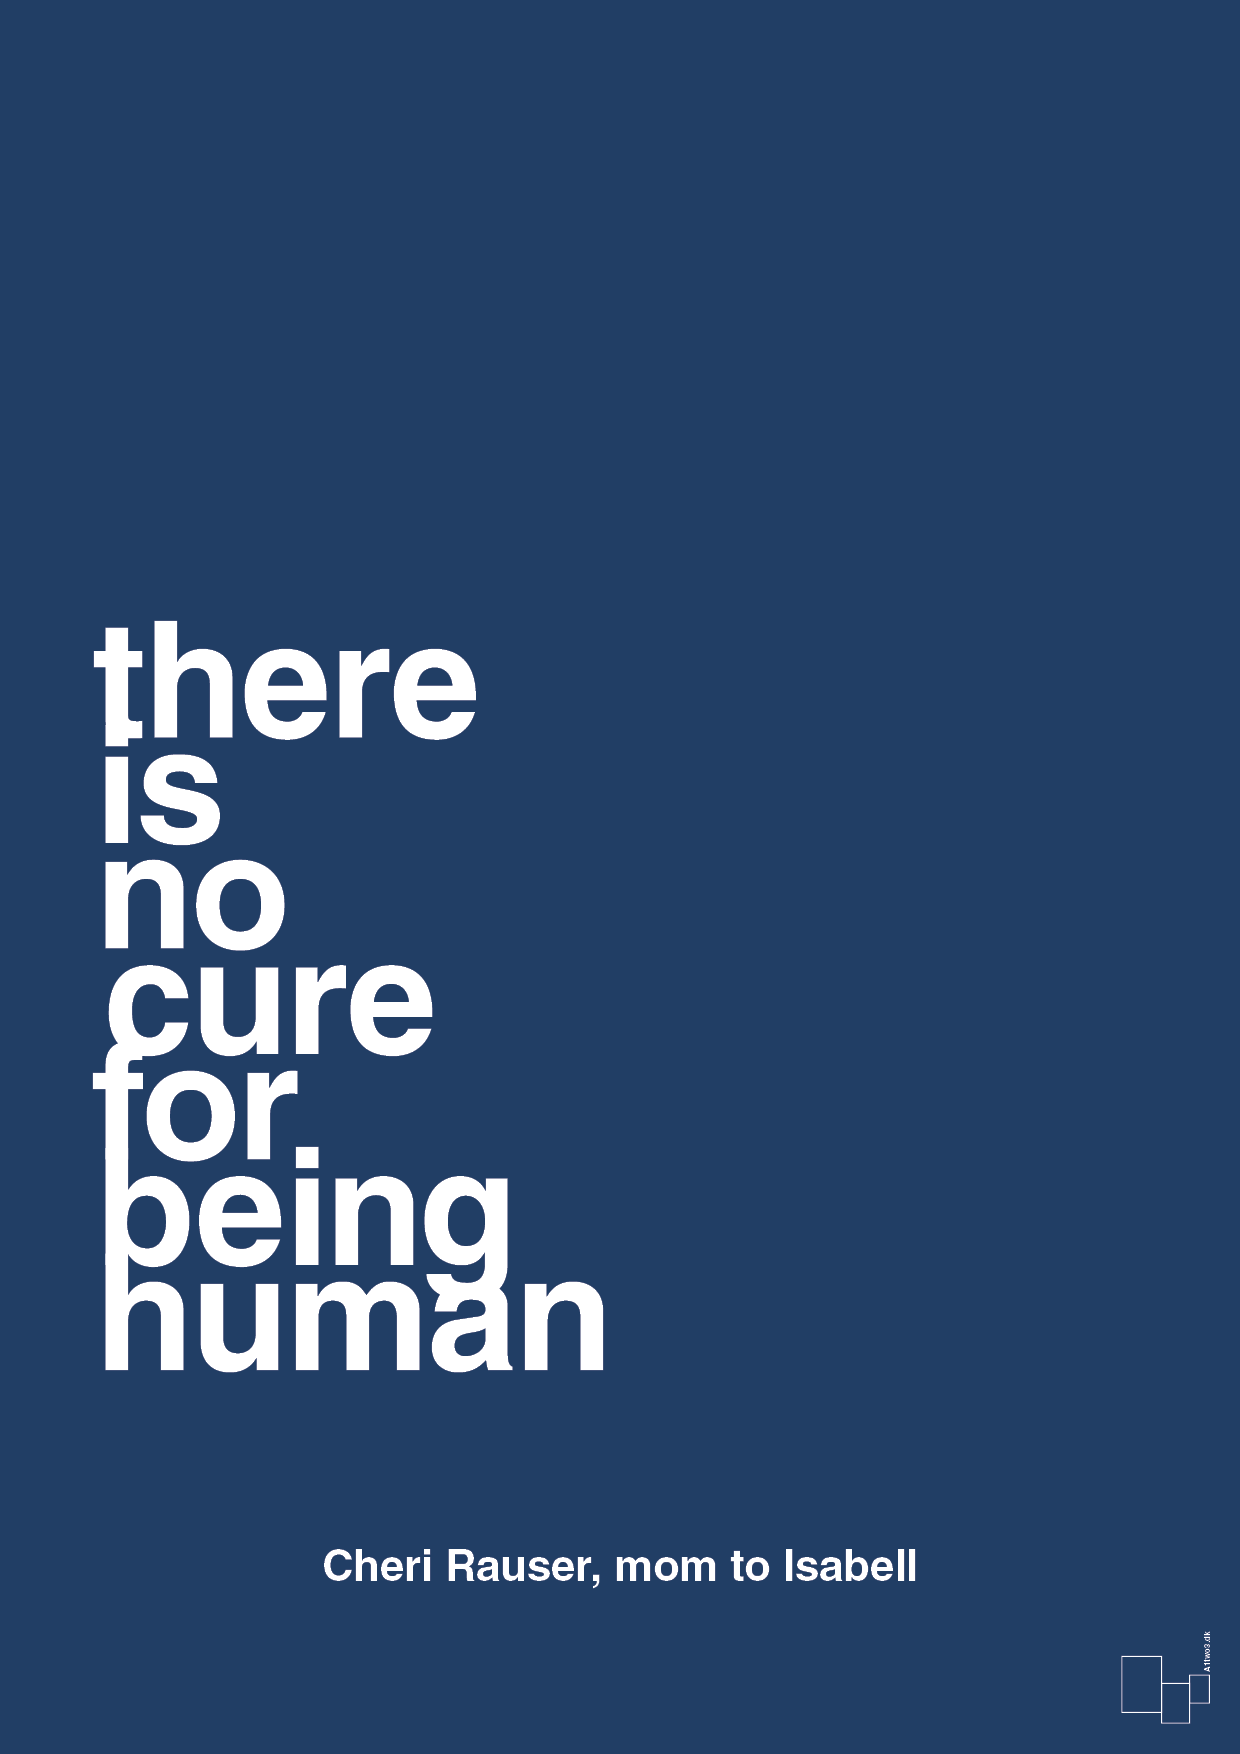 there is no cure for being human - Plakat med Samfund i Lapis Blue